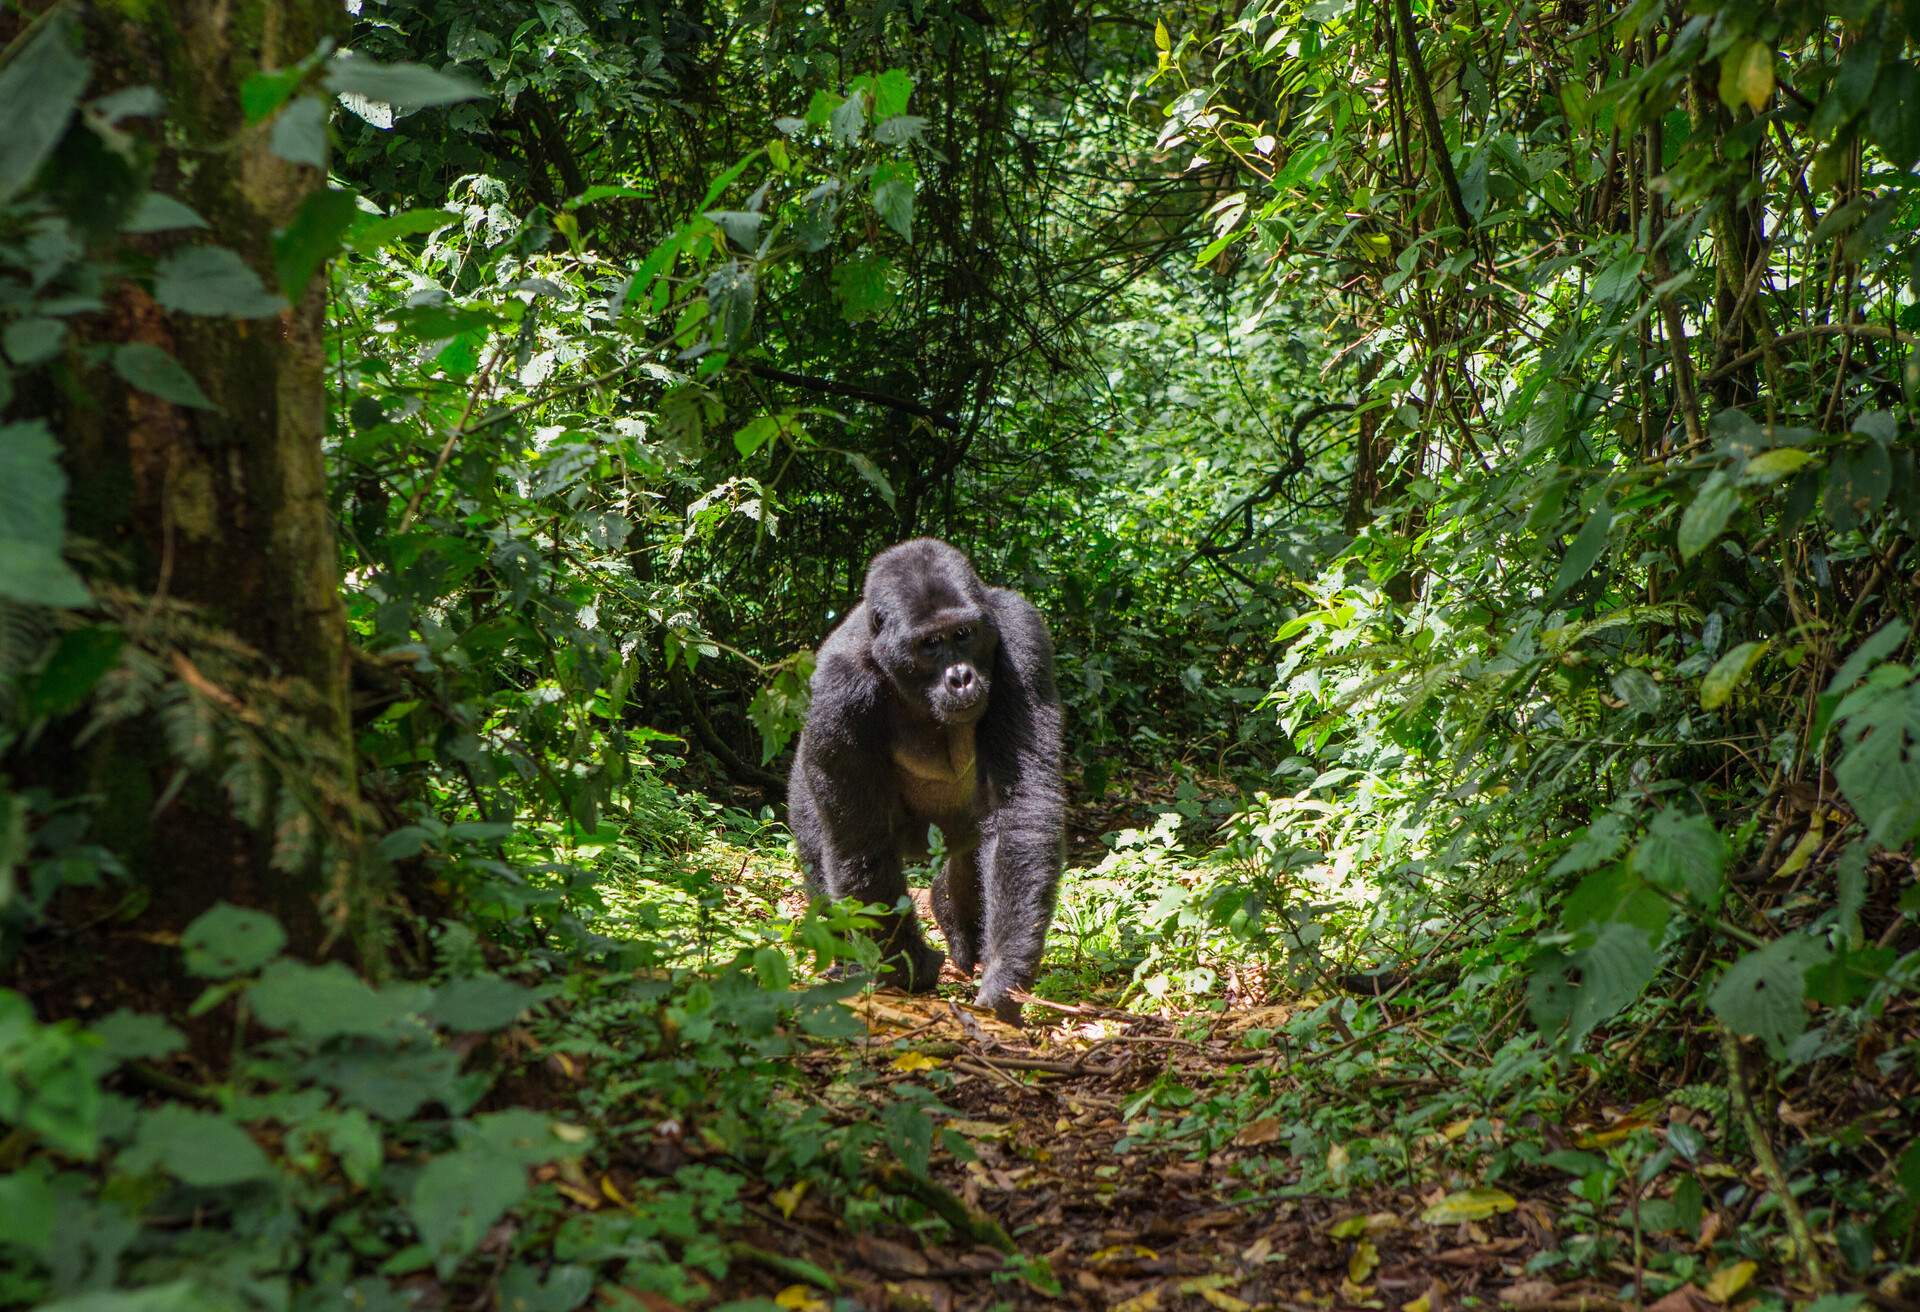 Mountain gorillas in the rainforest. Uganda. Bwindi Impenetrable Forest National Park. An excellent illustration.; Shutterstock ID 355162442